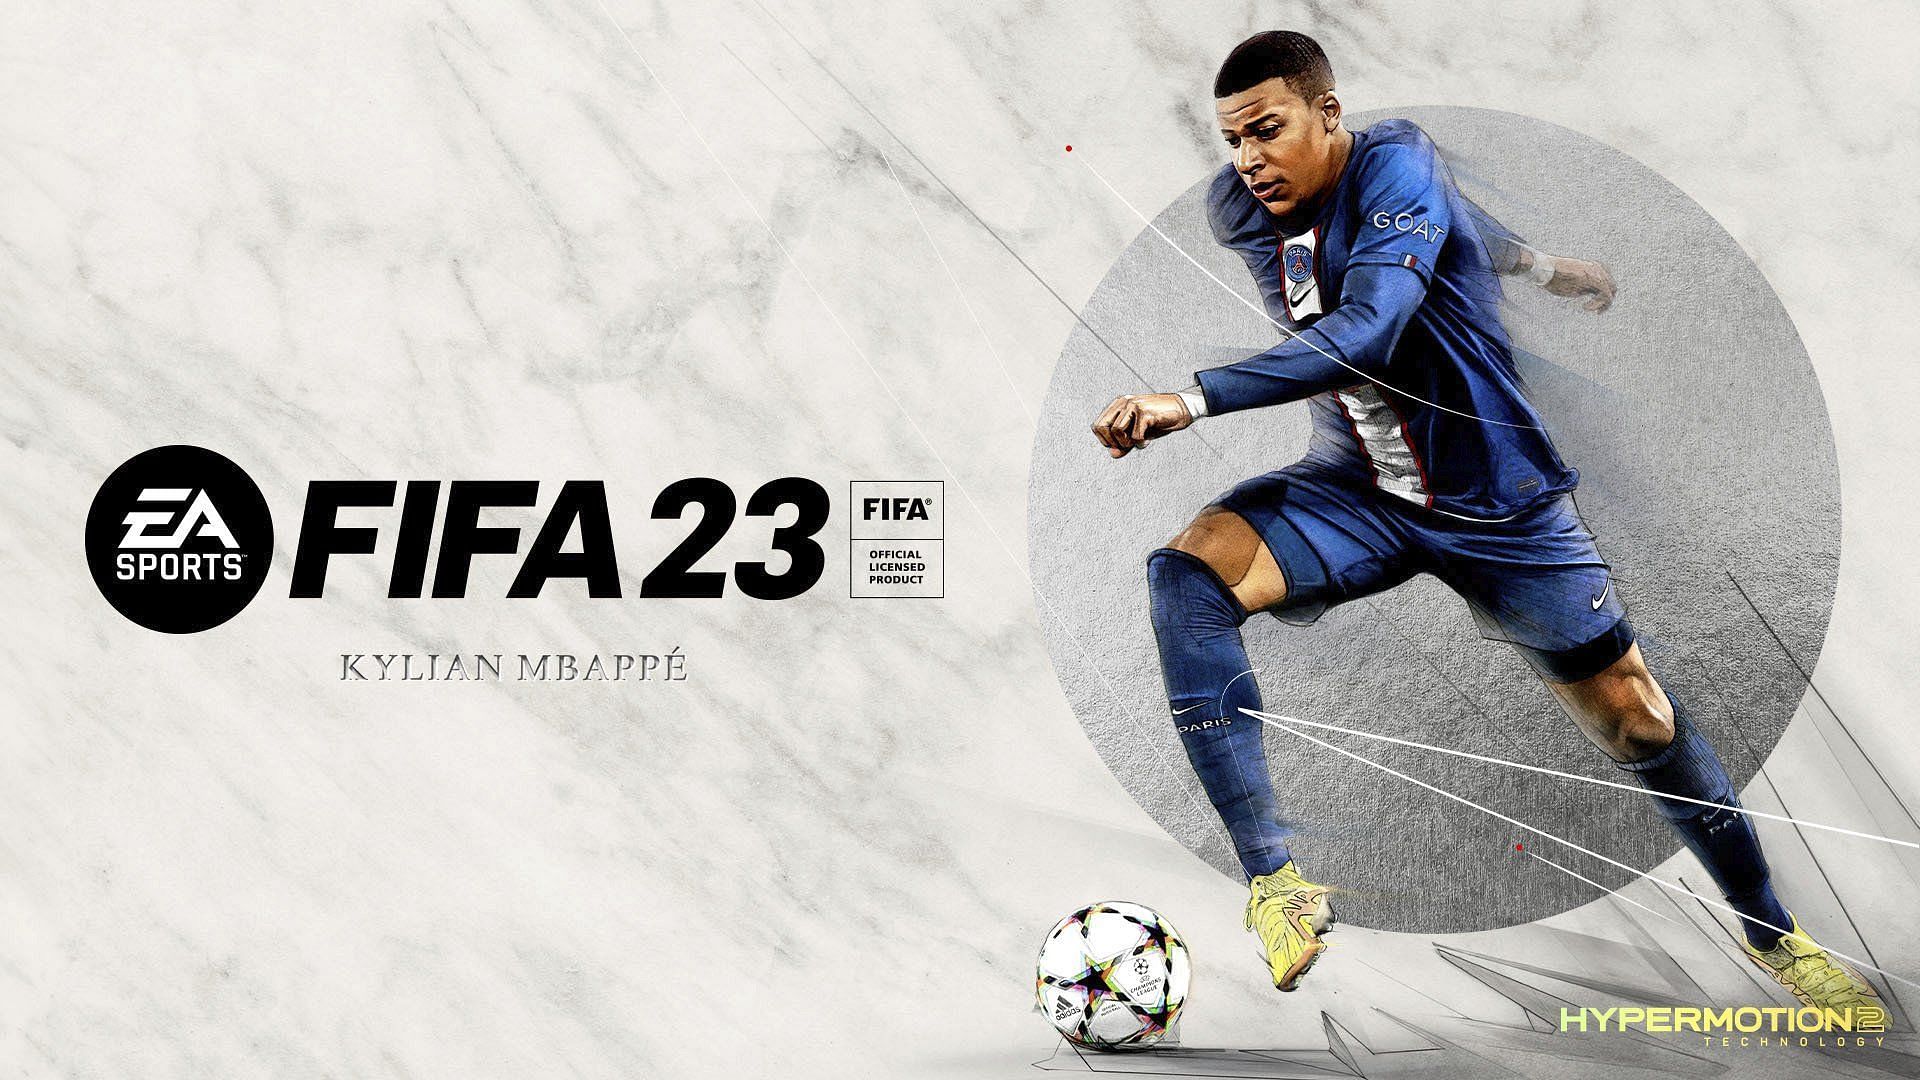 FIFA 23 consists of a variety of new features that could make this title extremely memorable (Image via EA Sports)